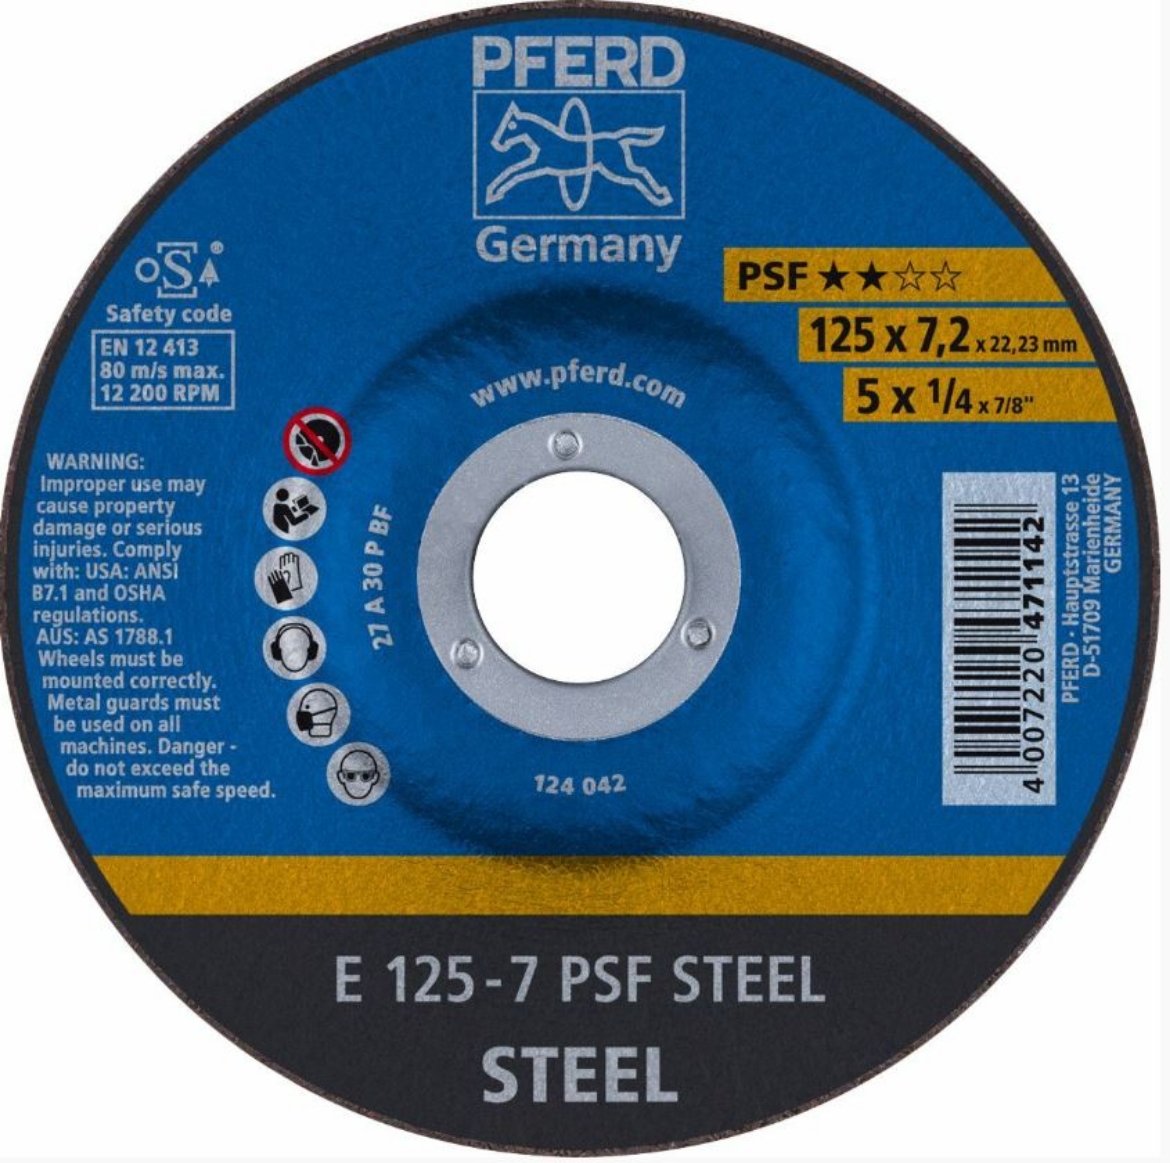 Picture of PFERD 5"/125MMX7.2MM GRINDING WHEEL STEEL E125-7 PSF - GP DEPRESSED CENTRE